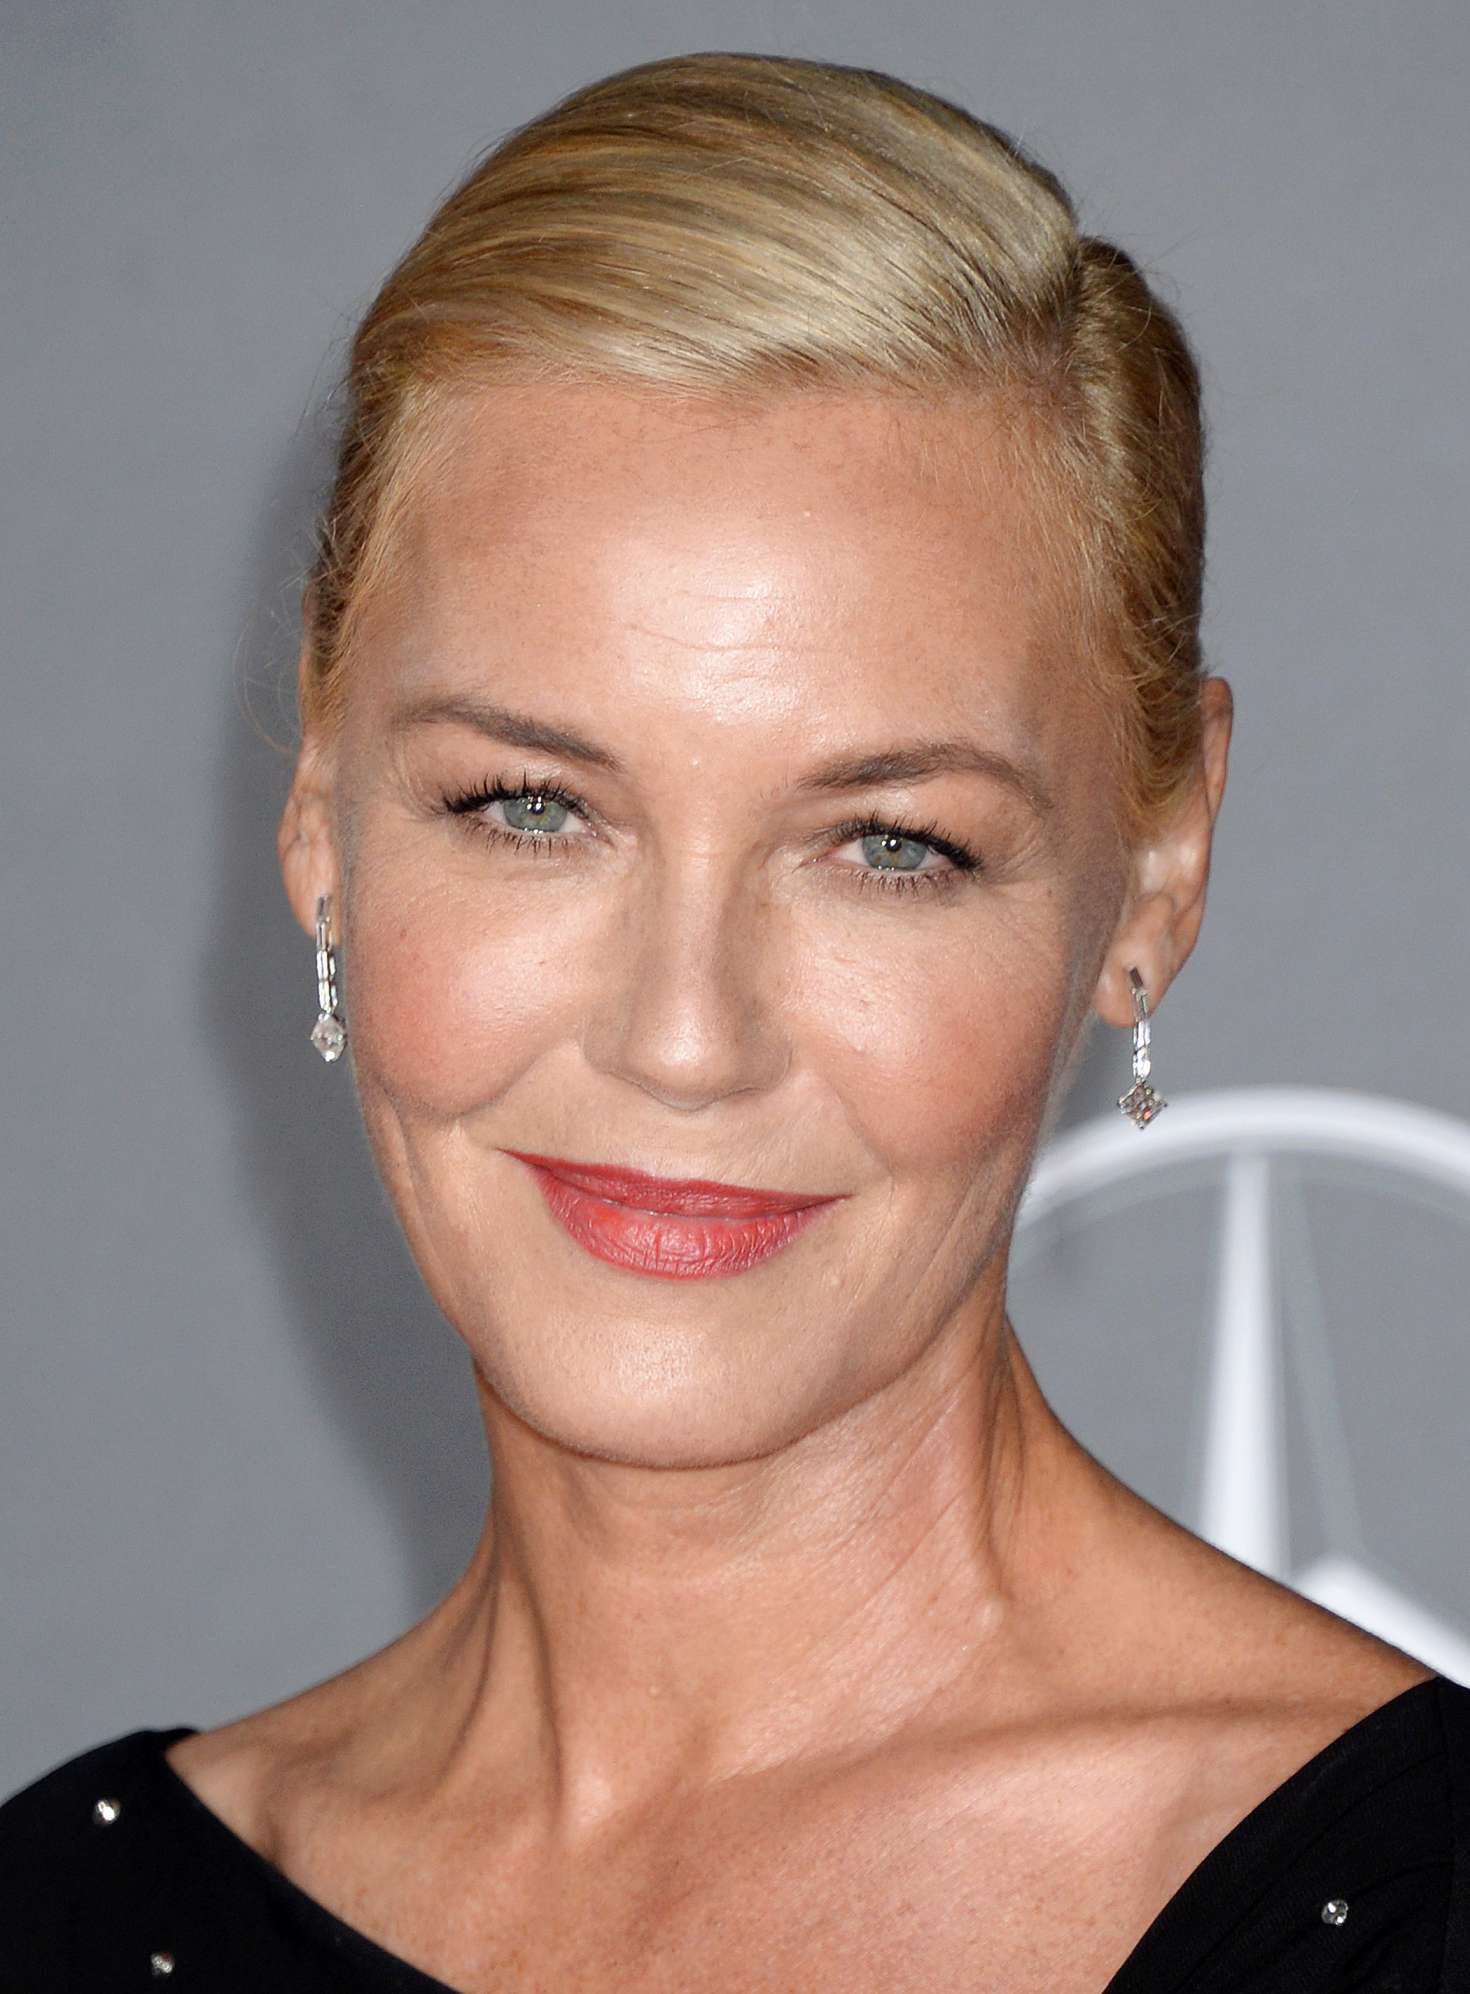 Connie Nielsen | DC Extended Universe Wiki | FANDOM powered by Wikia